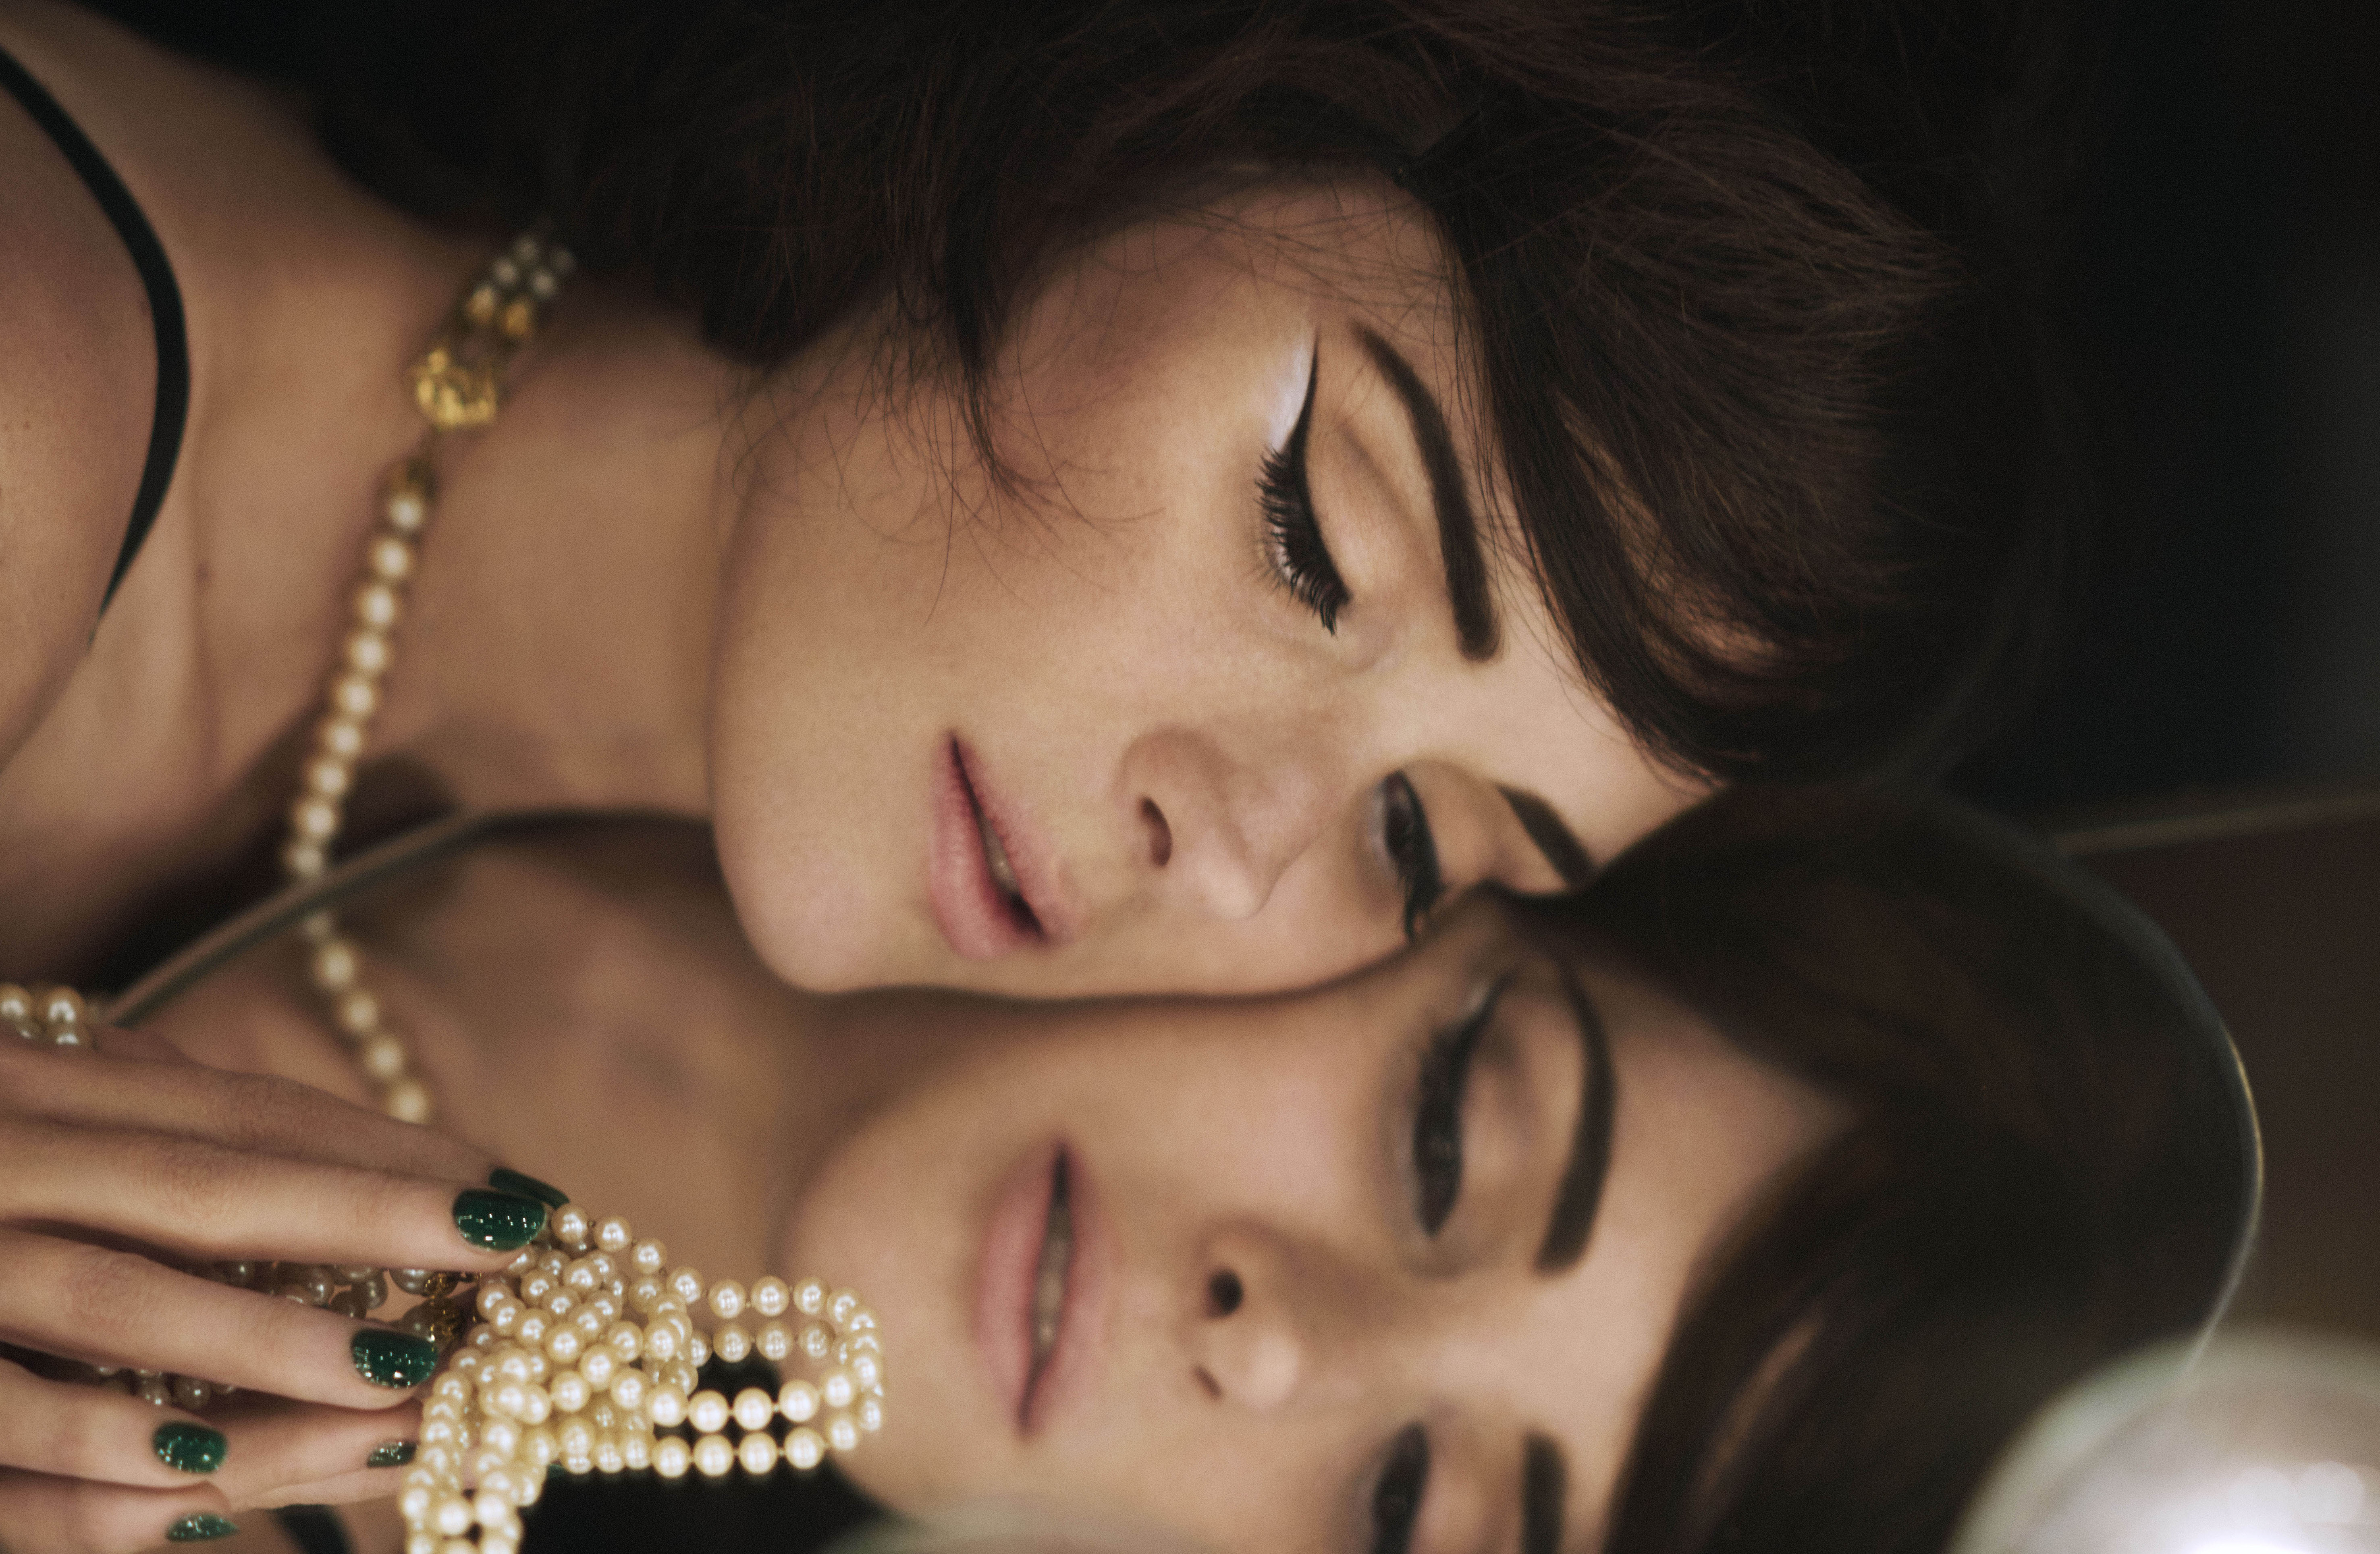 WINONA RYDER IS THE FACE OF MARC JACOBS BEAUTY